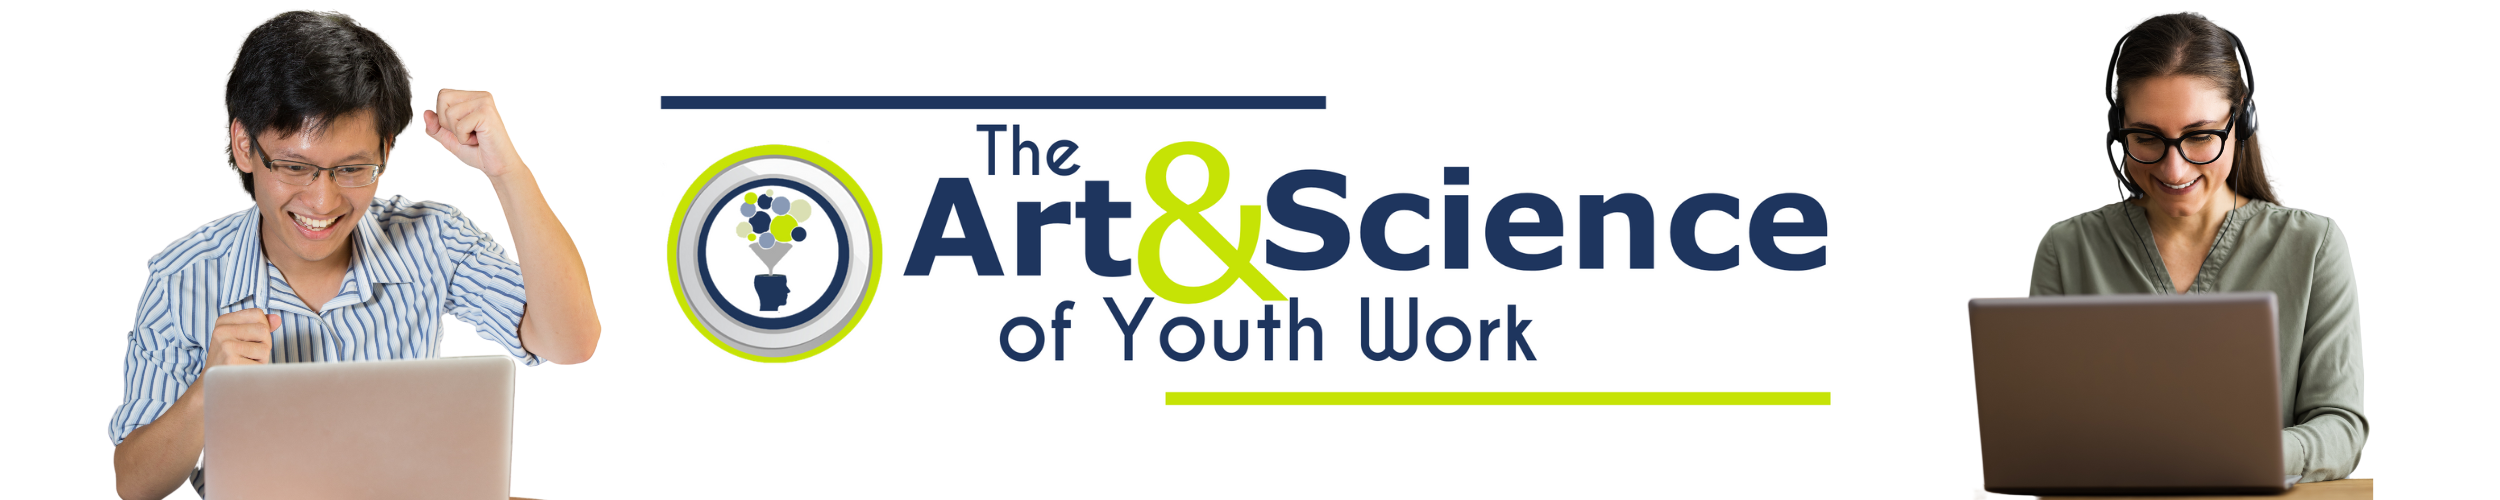 The Art and Science of youth work logo